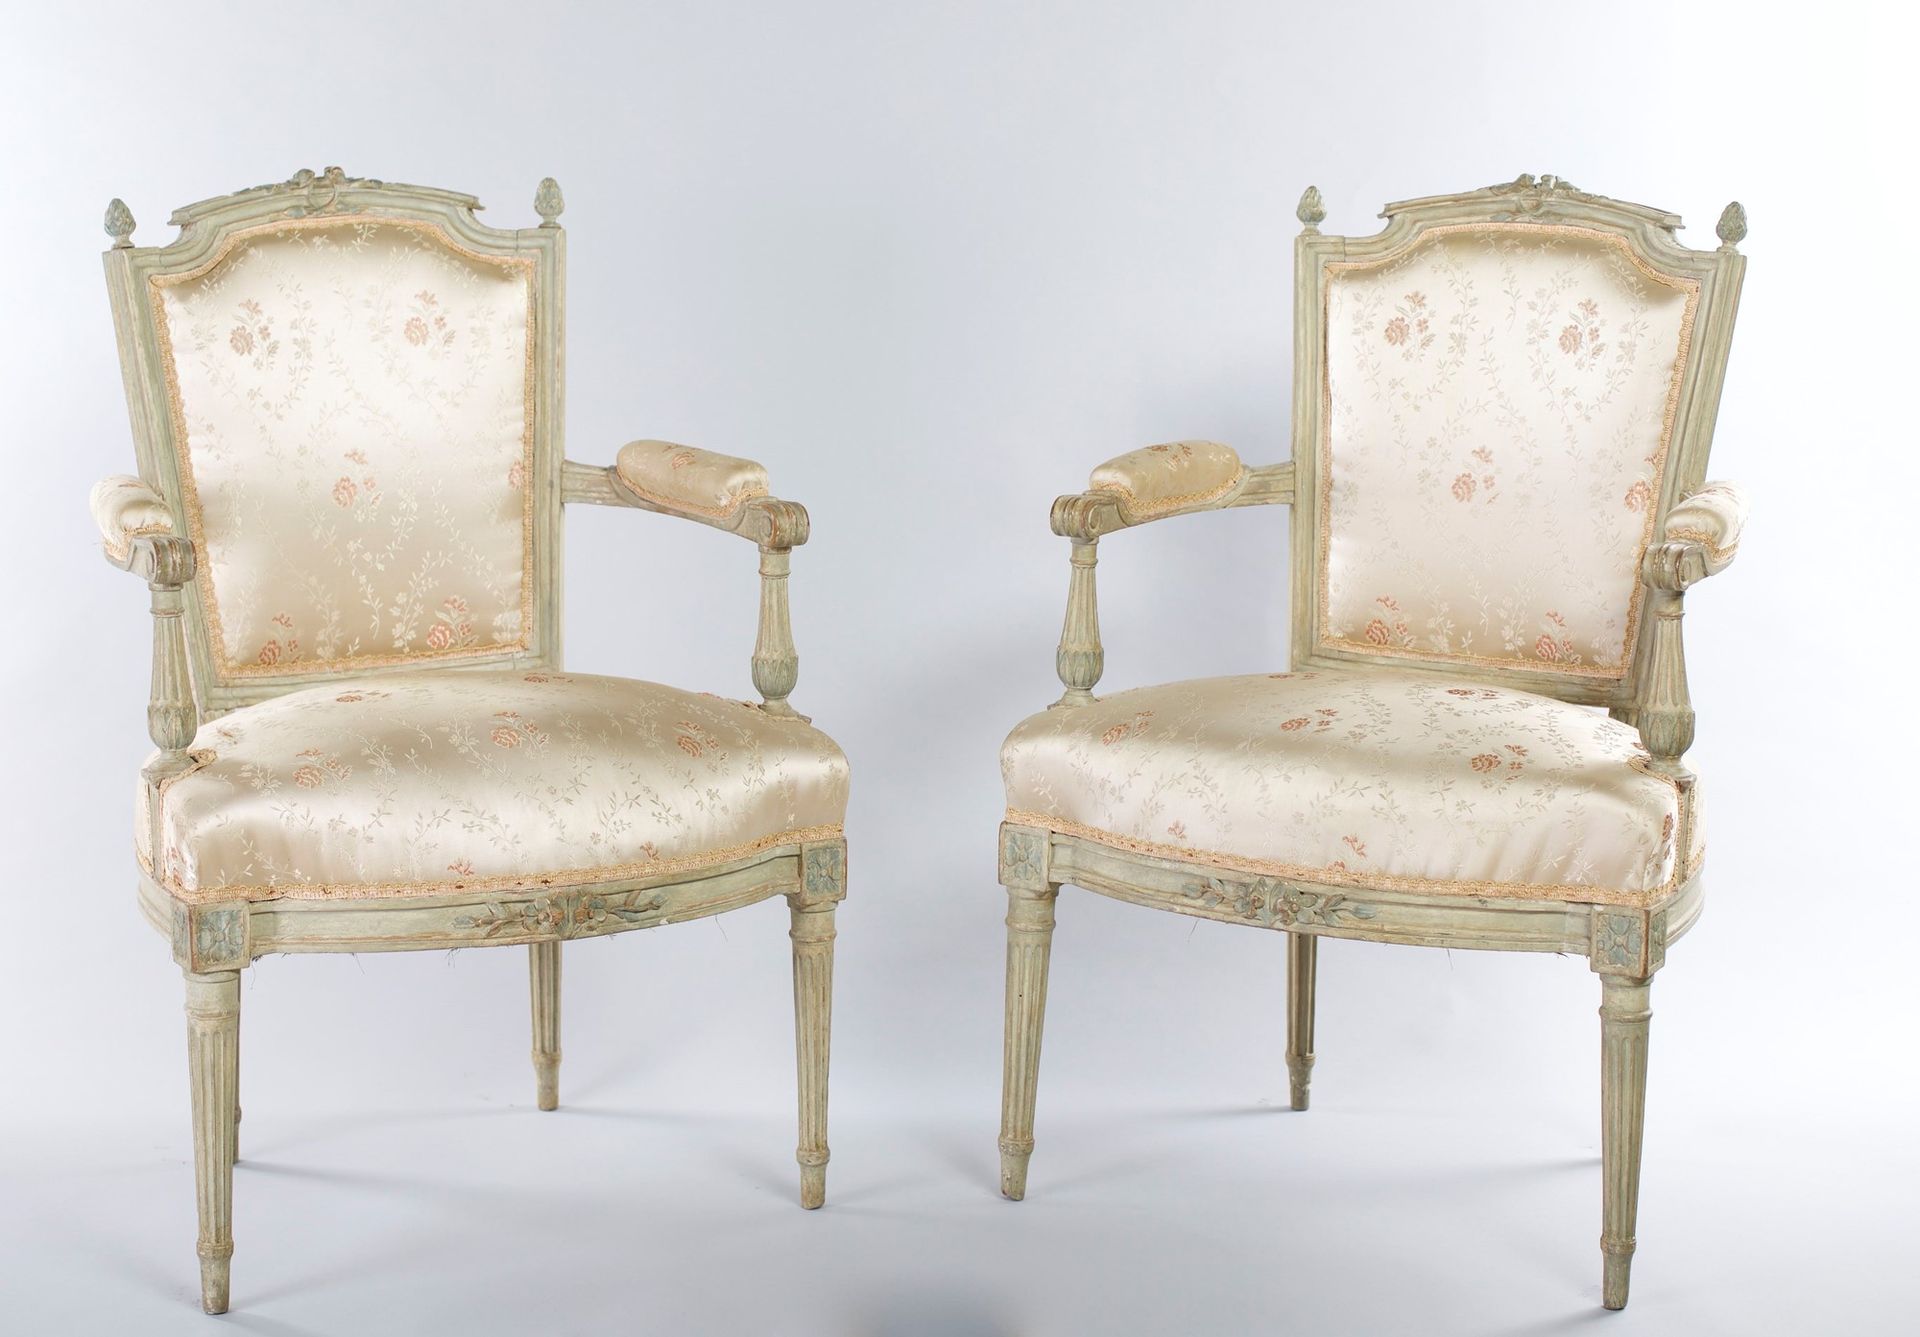 Pair of armchairs in green lacquered wood, 19th century con marcos centrados por&hellip;